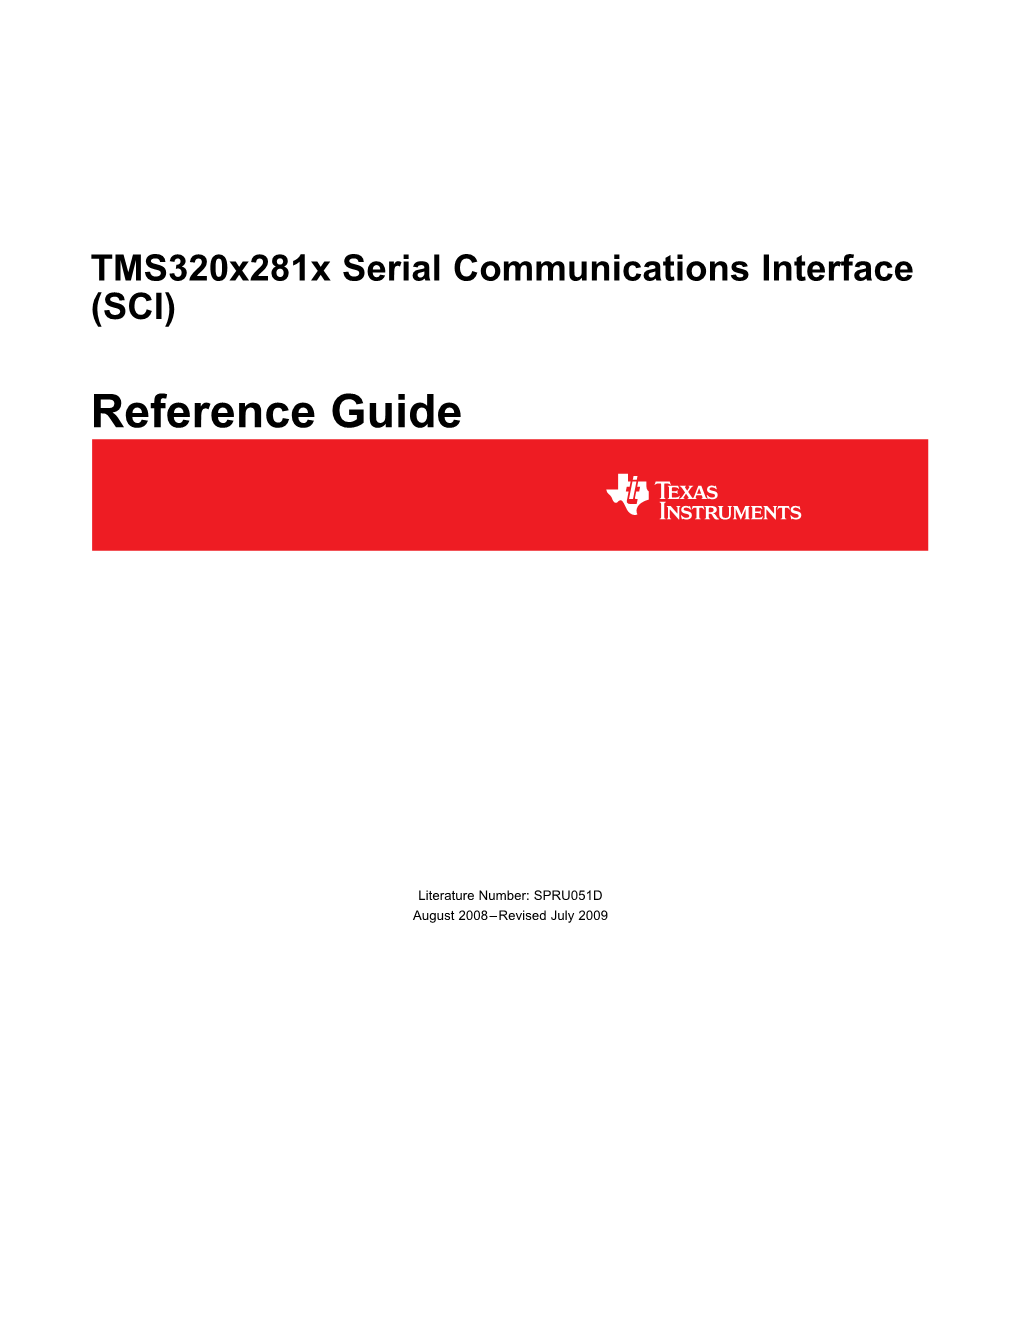 Tms320x281x Serial Communications Interface Reference Guide